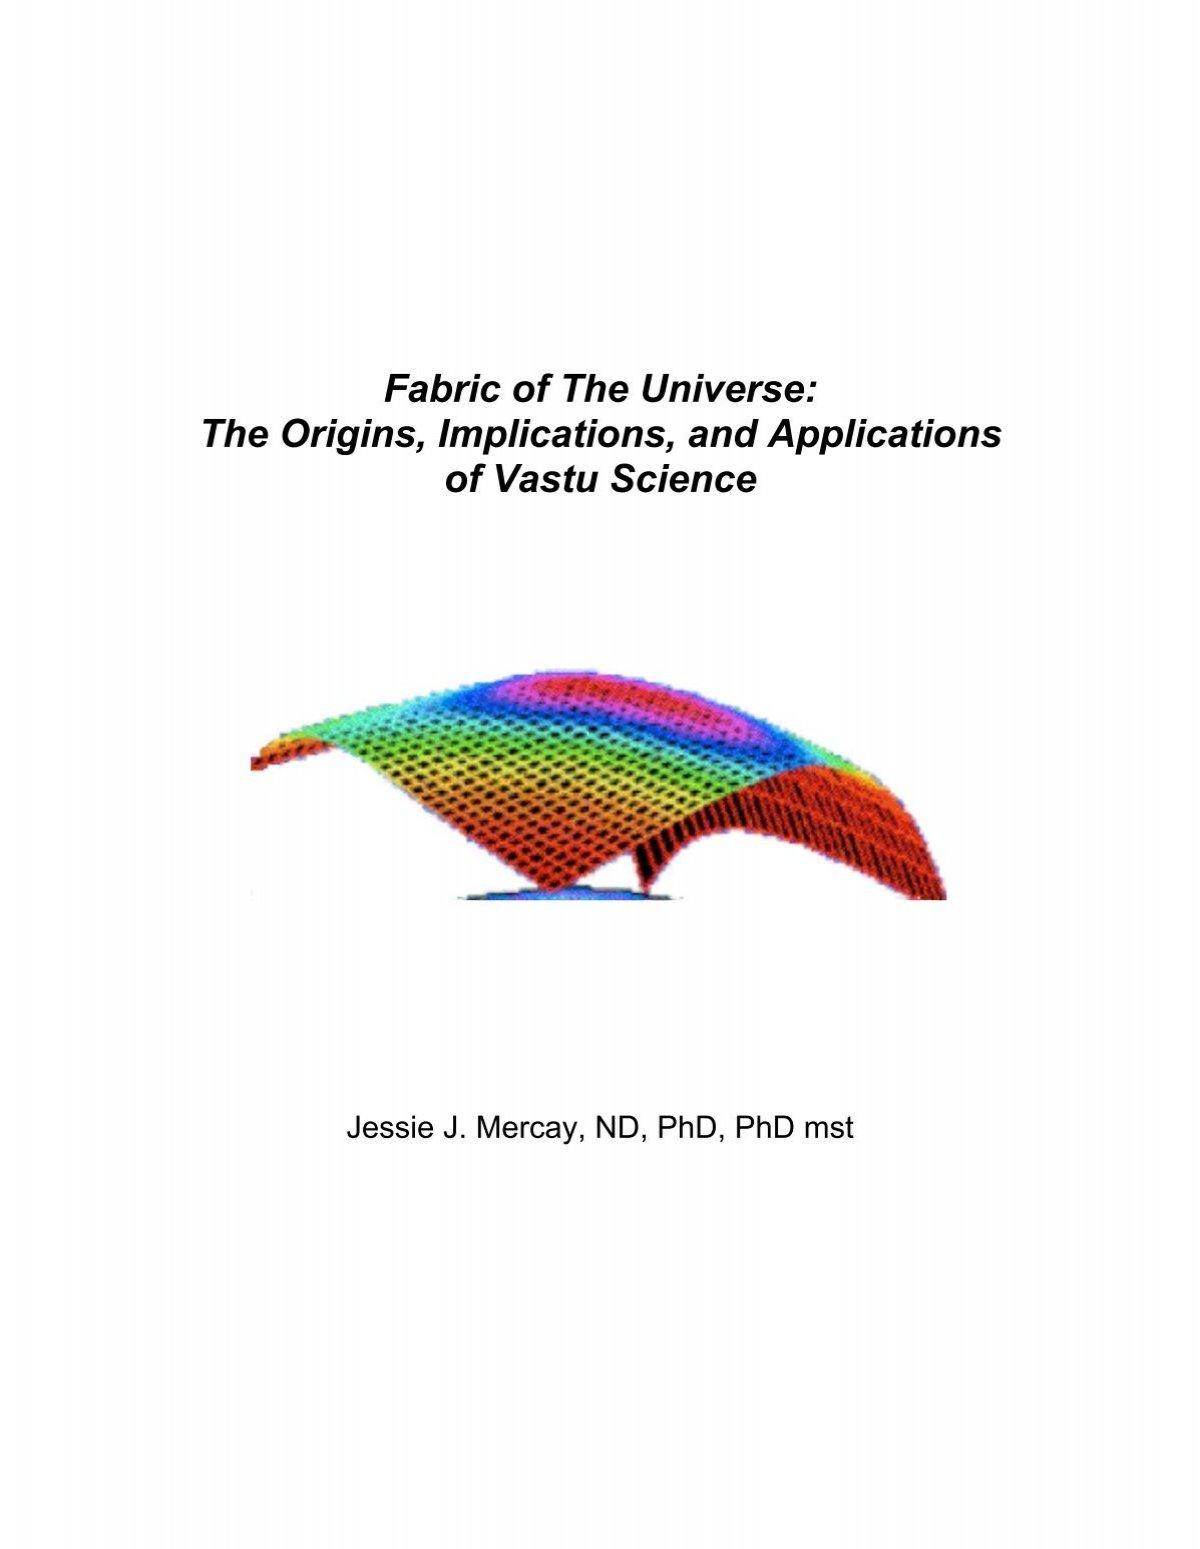  Fabric of the Universe